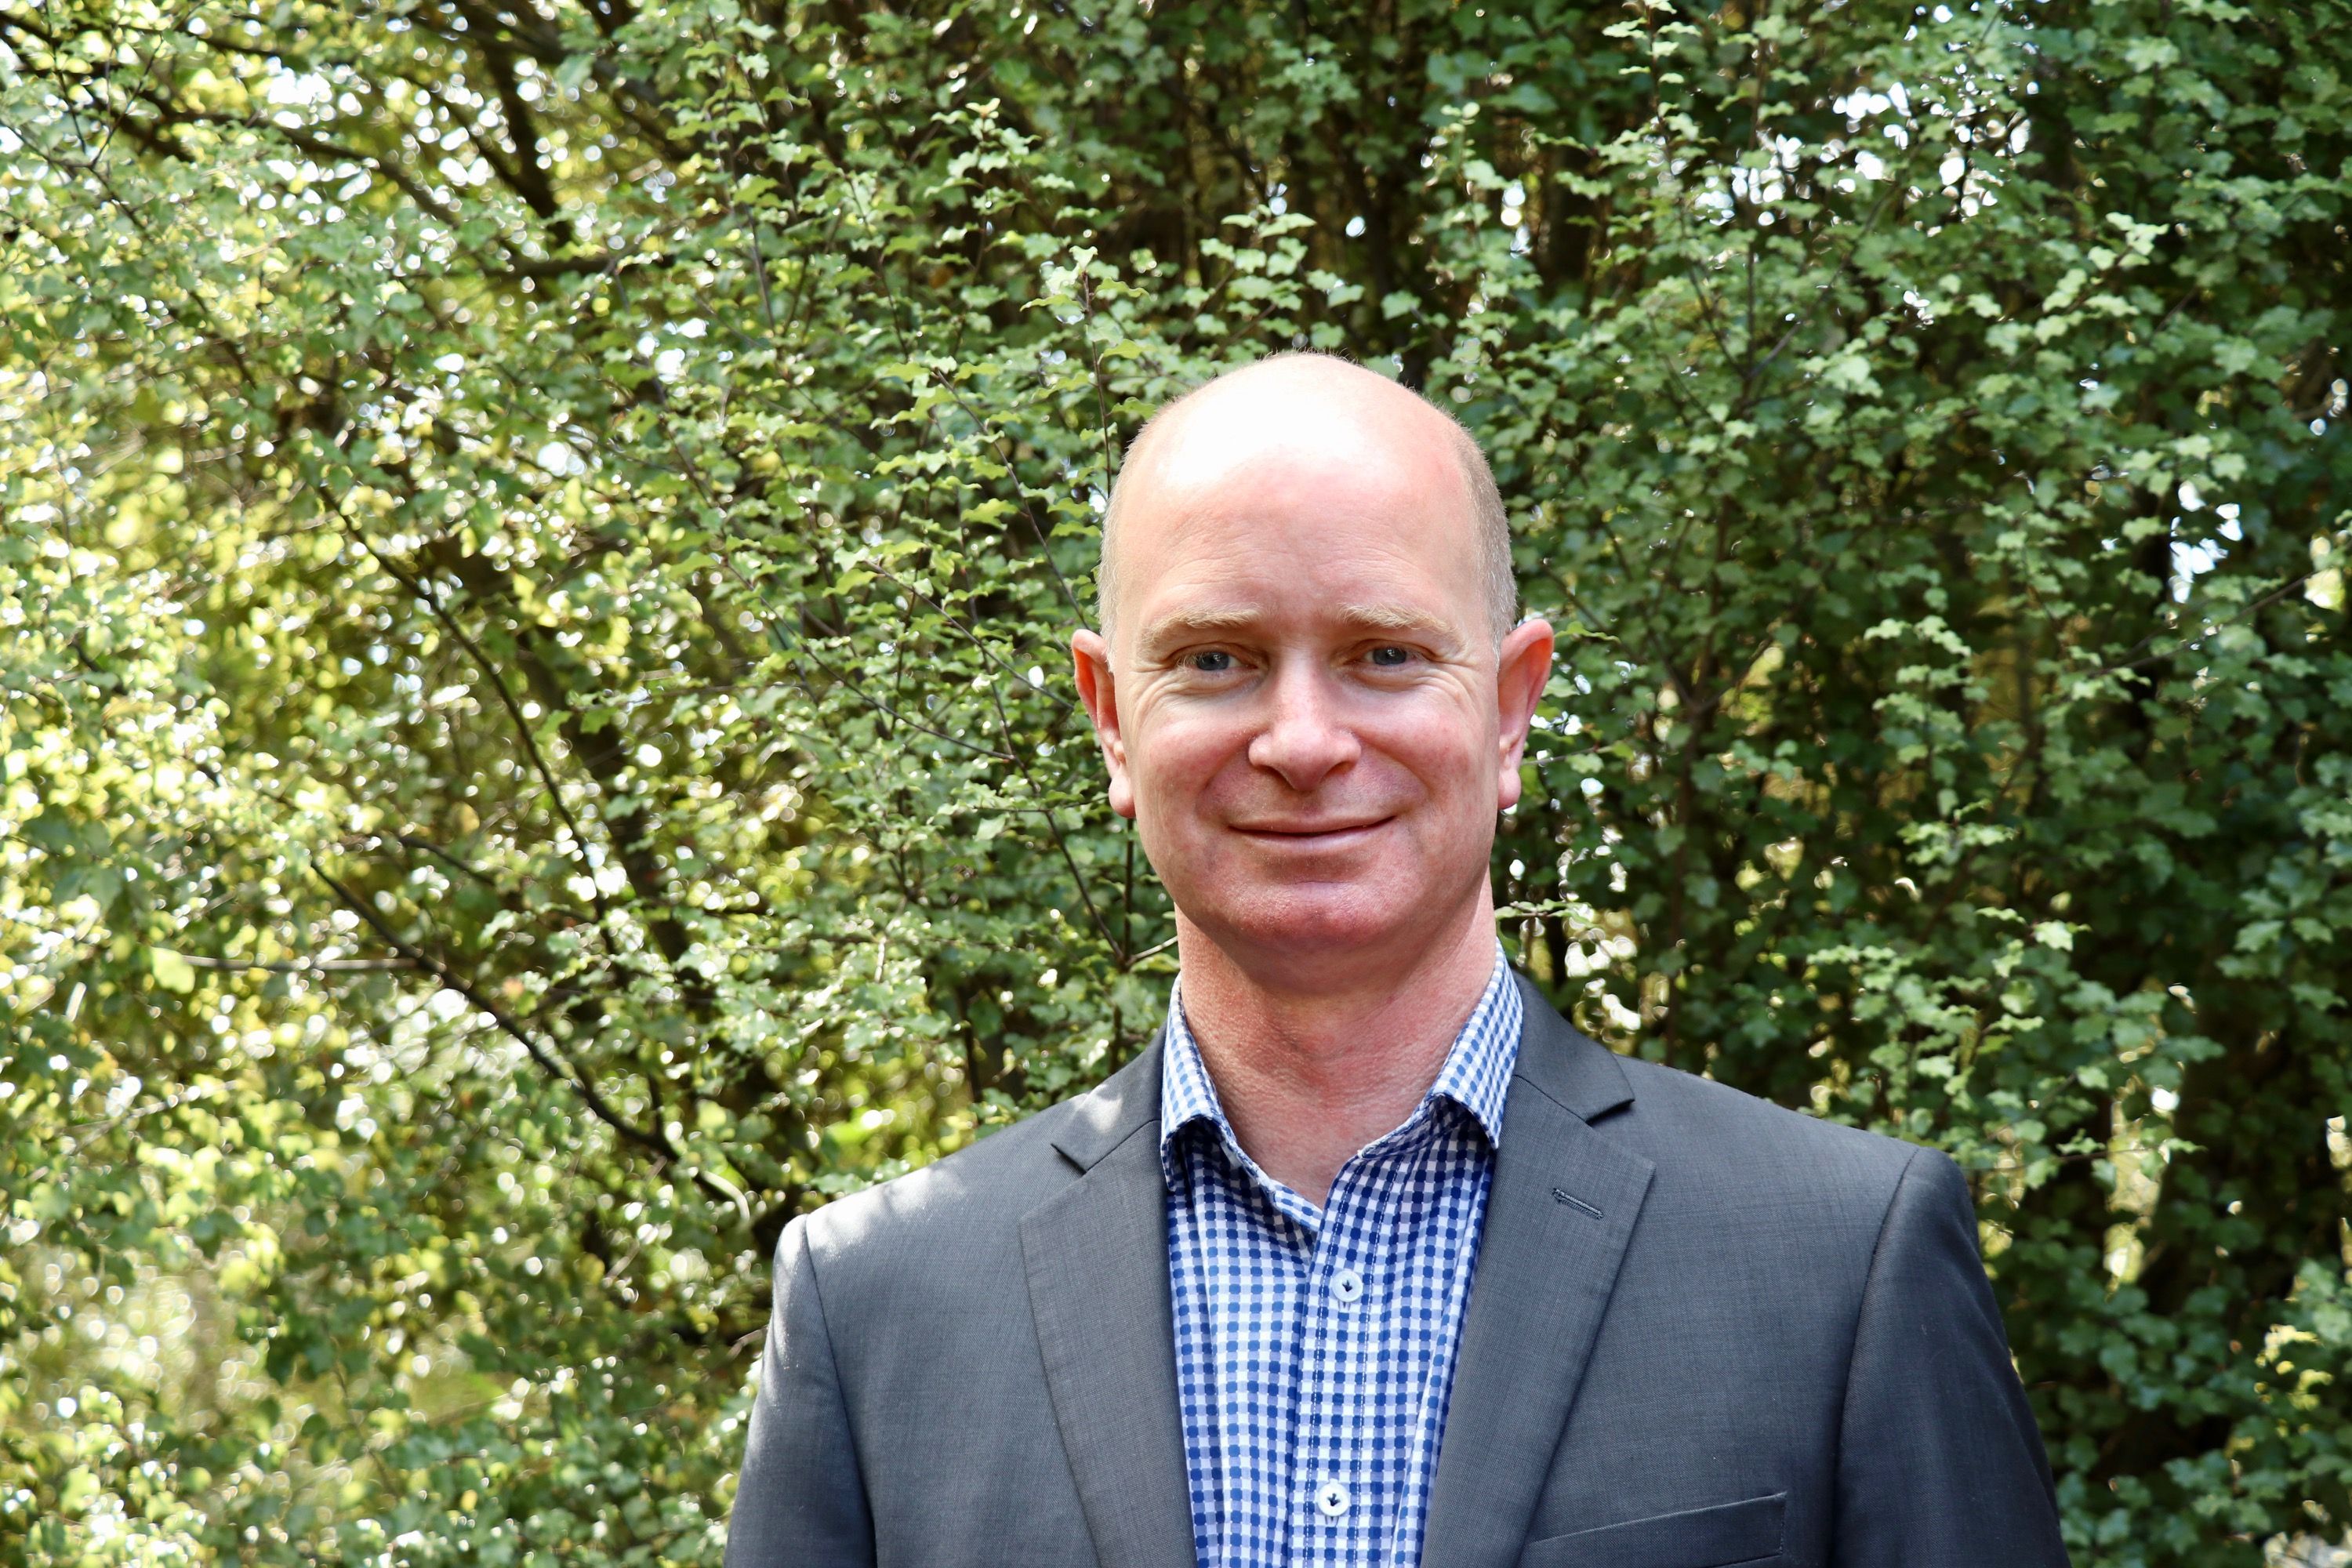 Shot of Justin Potter, middle aged man of Caucasian decent, from the chest up wearing a grey suit and blue check shirt. Leafy trees in the background.